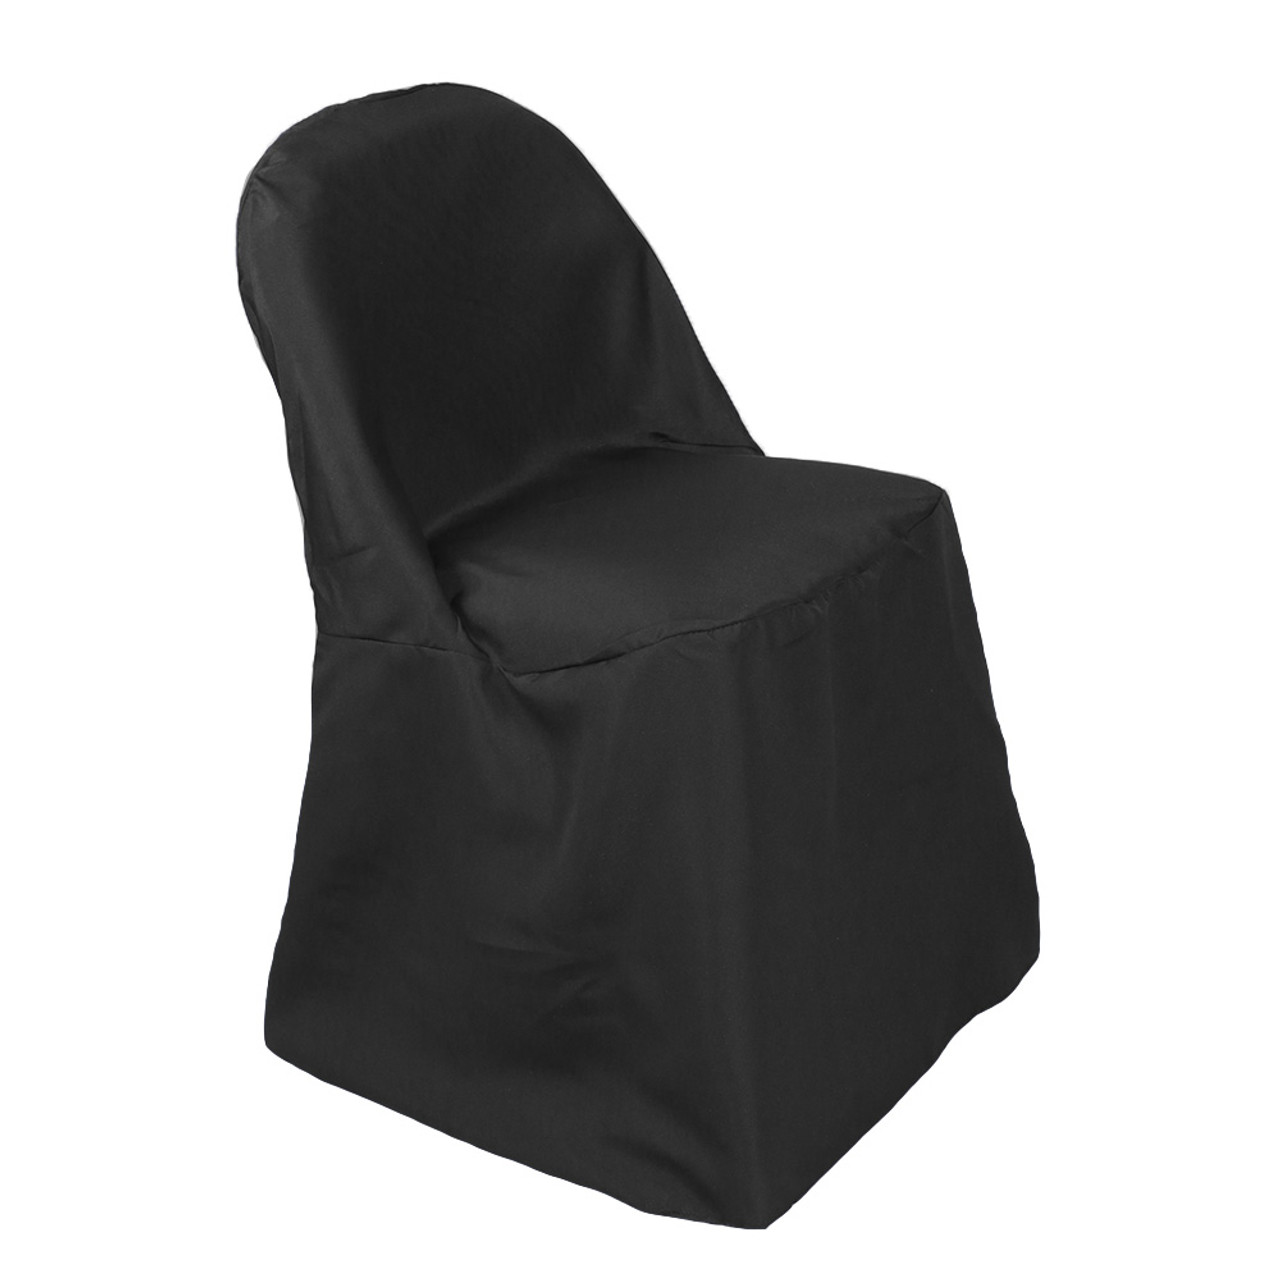 Polyester Folding Chair Cover Black - Your Chair Covers Inc.